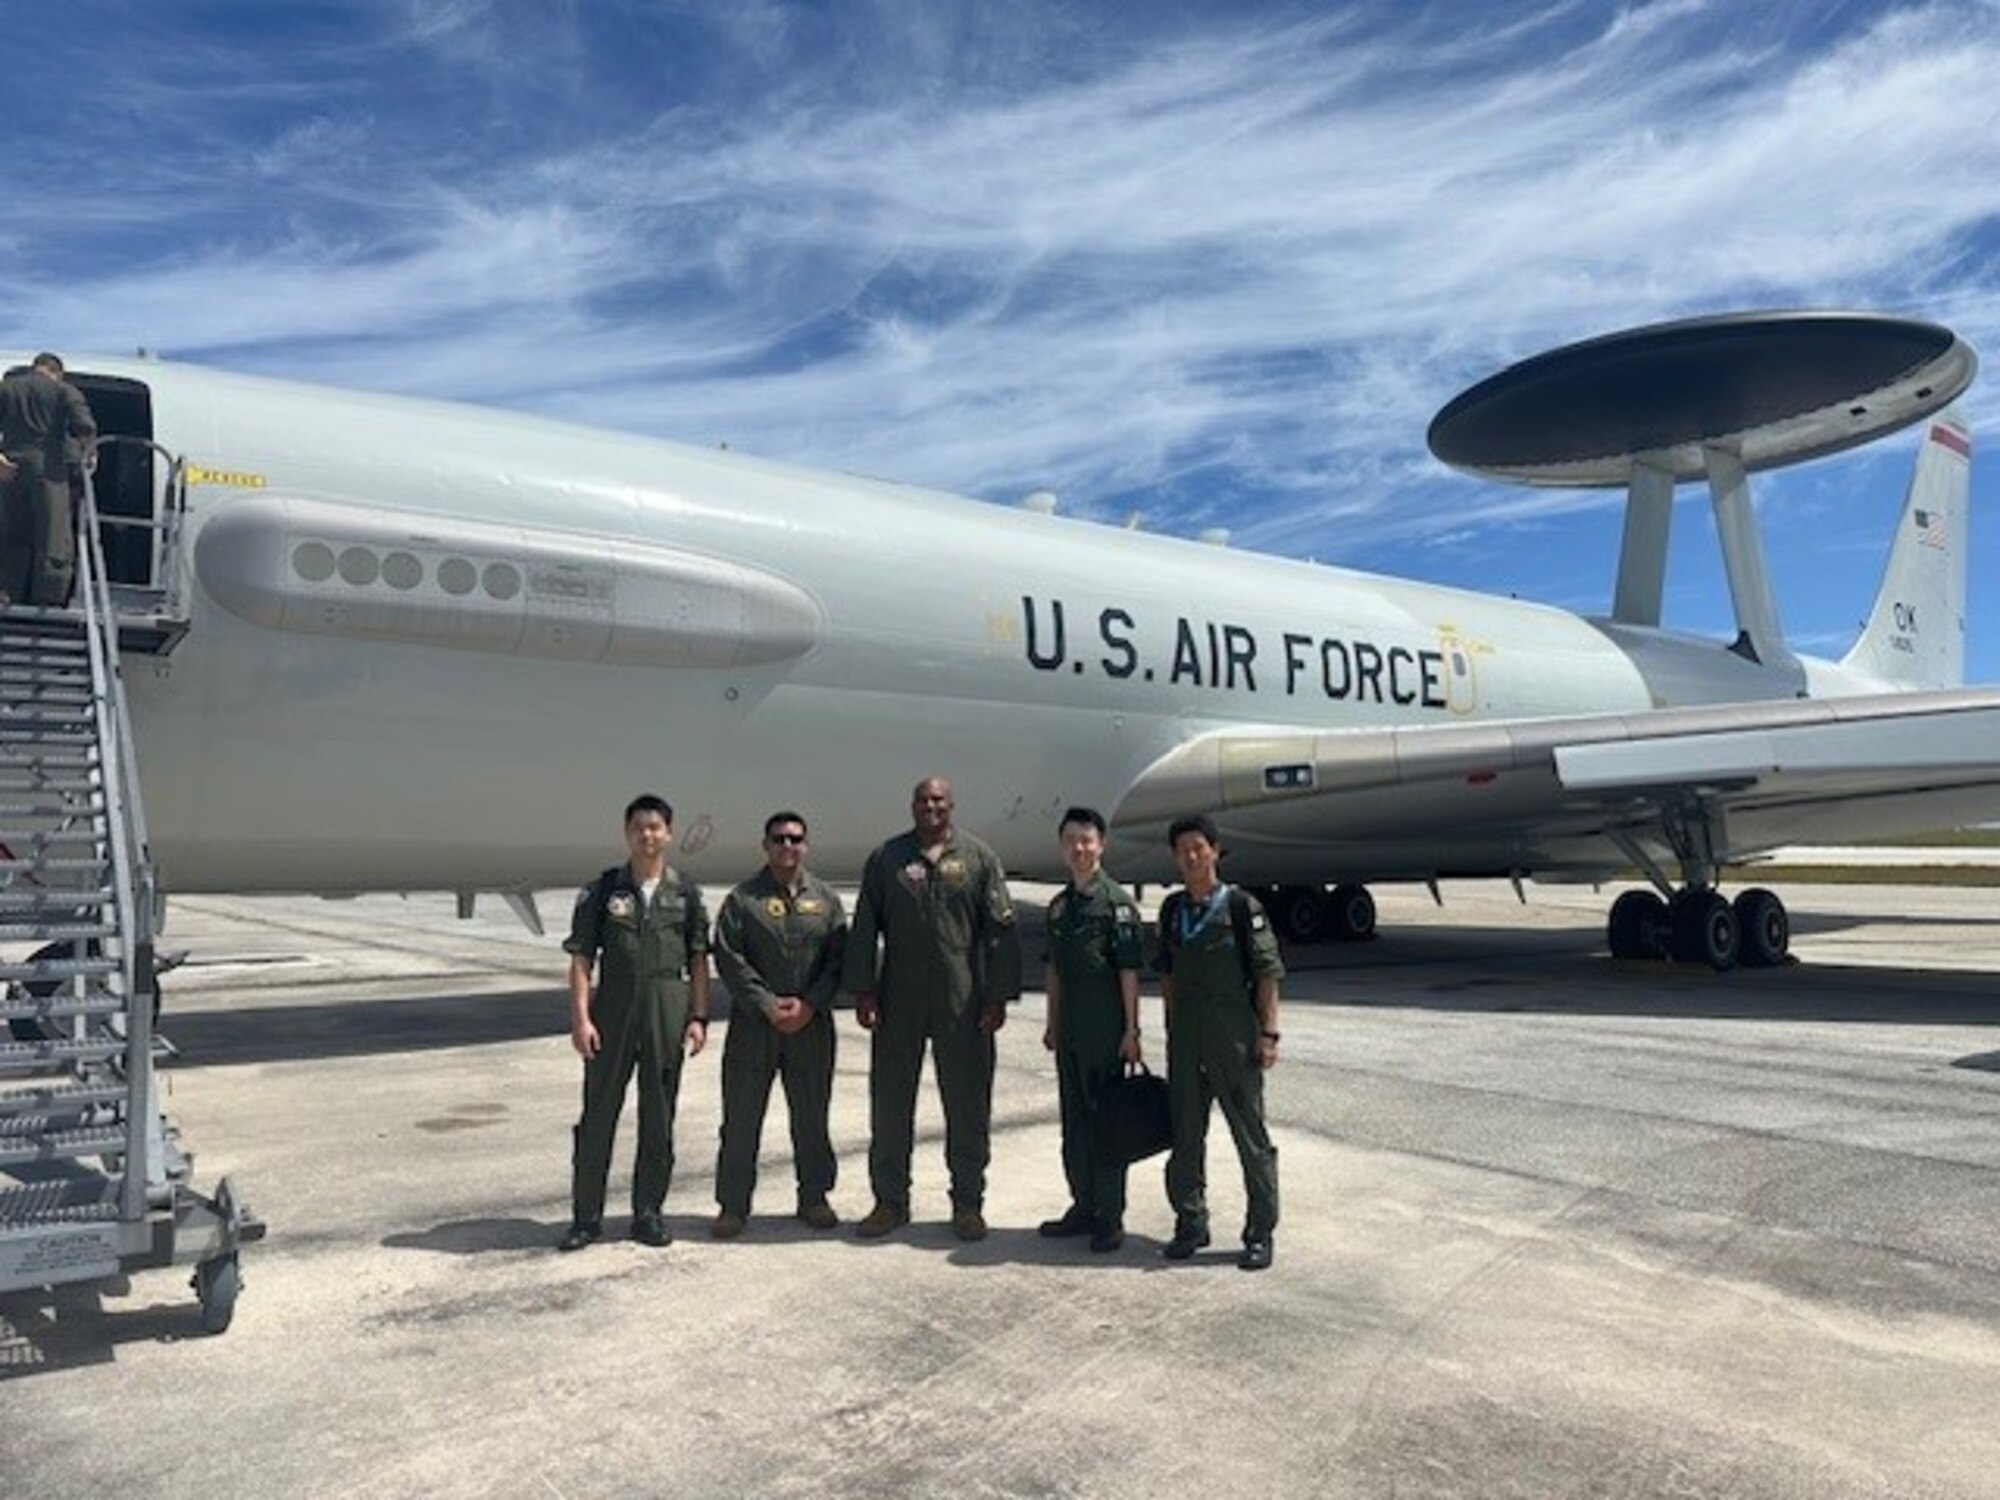 Men standing in front of E-3 AWACS aircraft